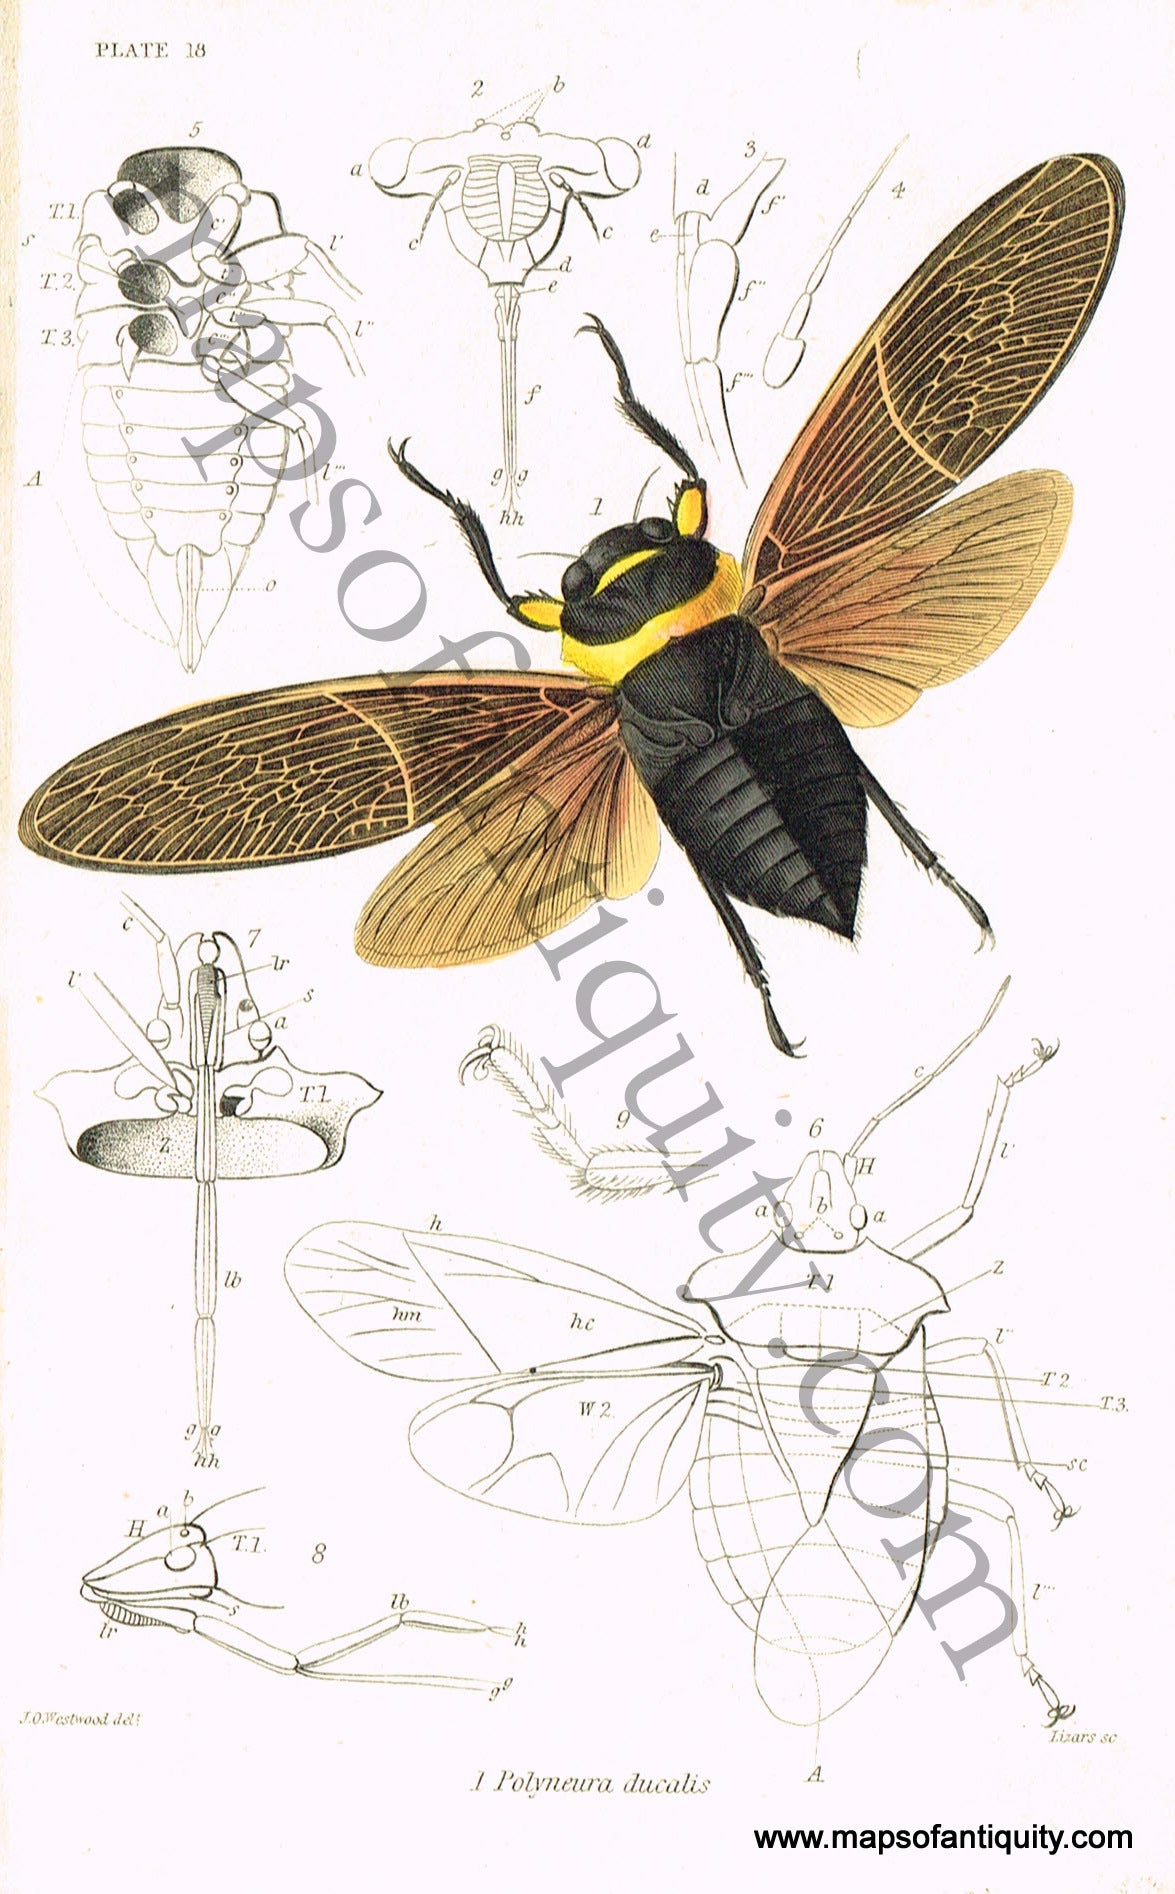 Antique-Hand-Colored-Print-Polyneura-ducalis-Antique-Prints-Natural-History-Insects-1840-Duncan-Maps-Of-Antiquity